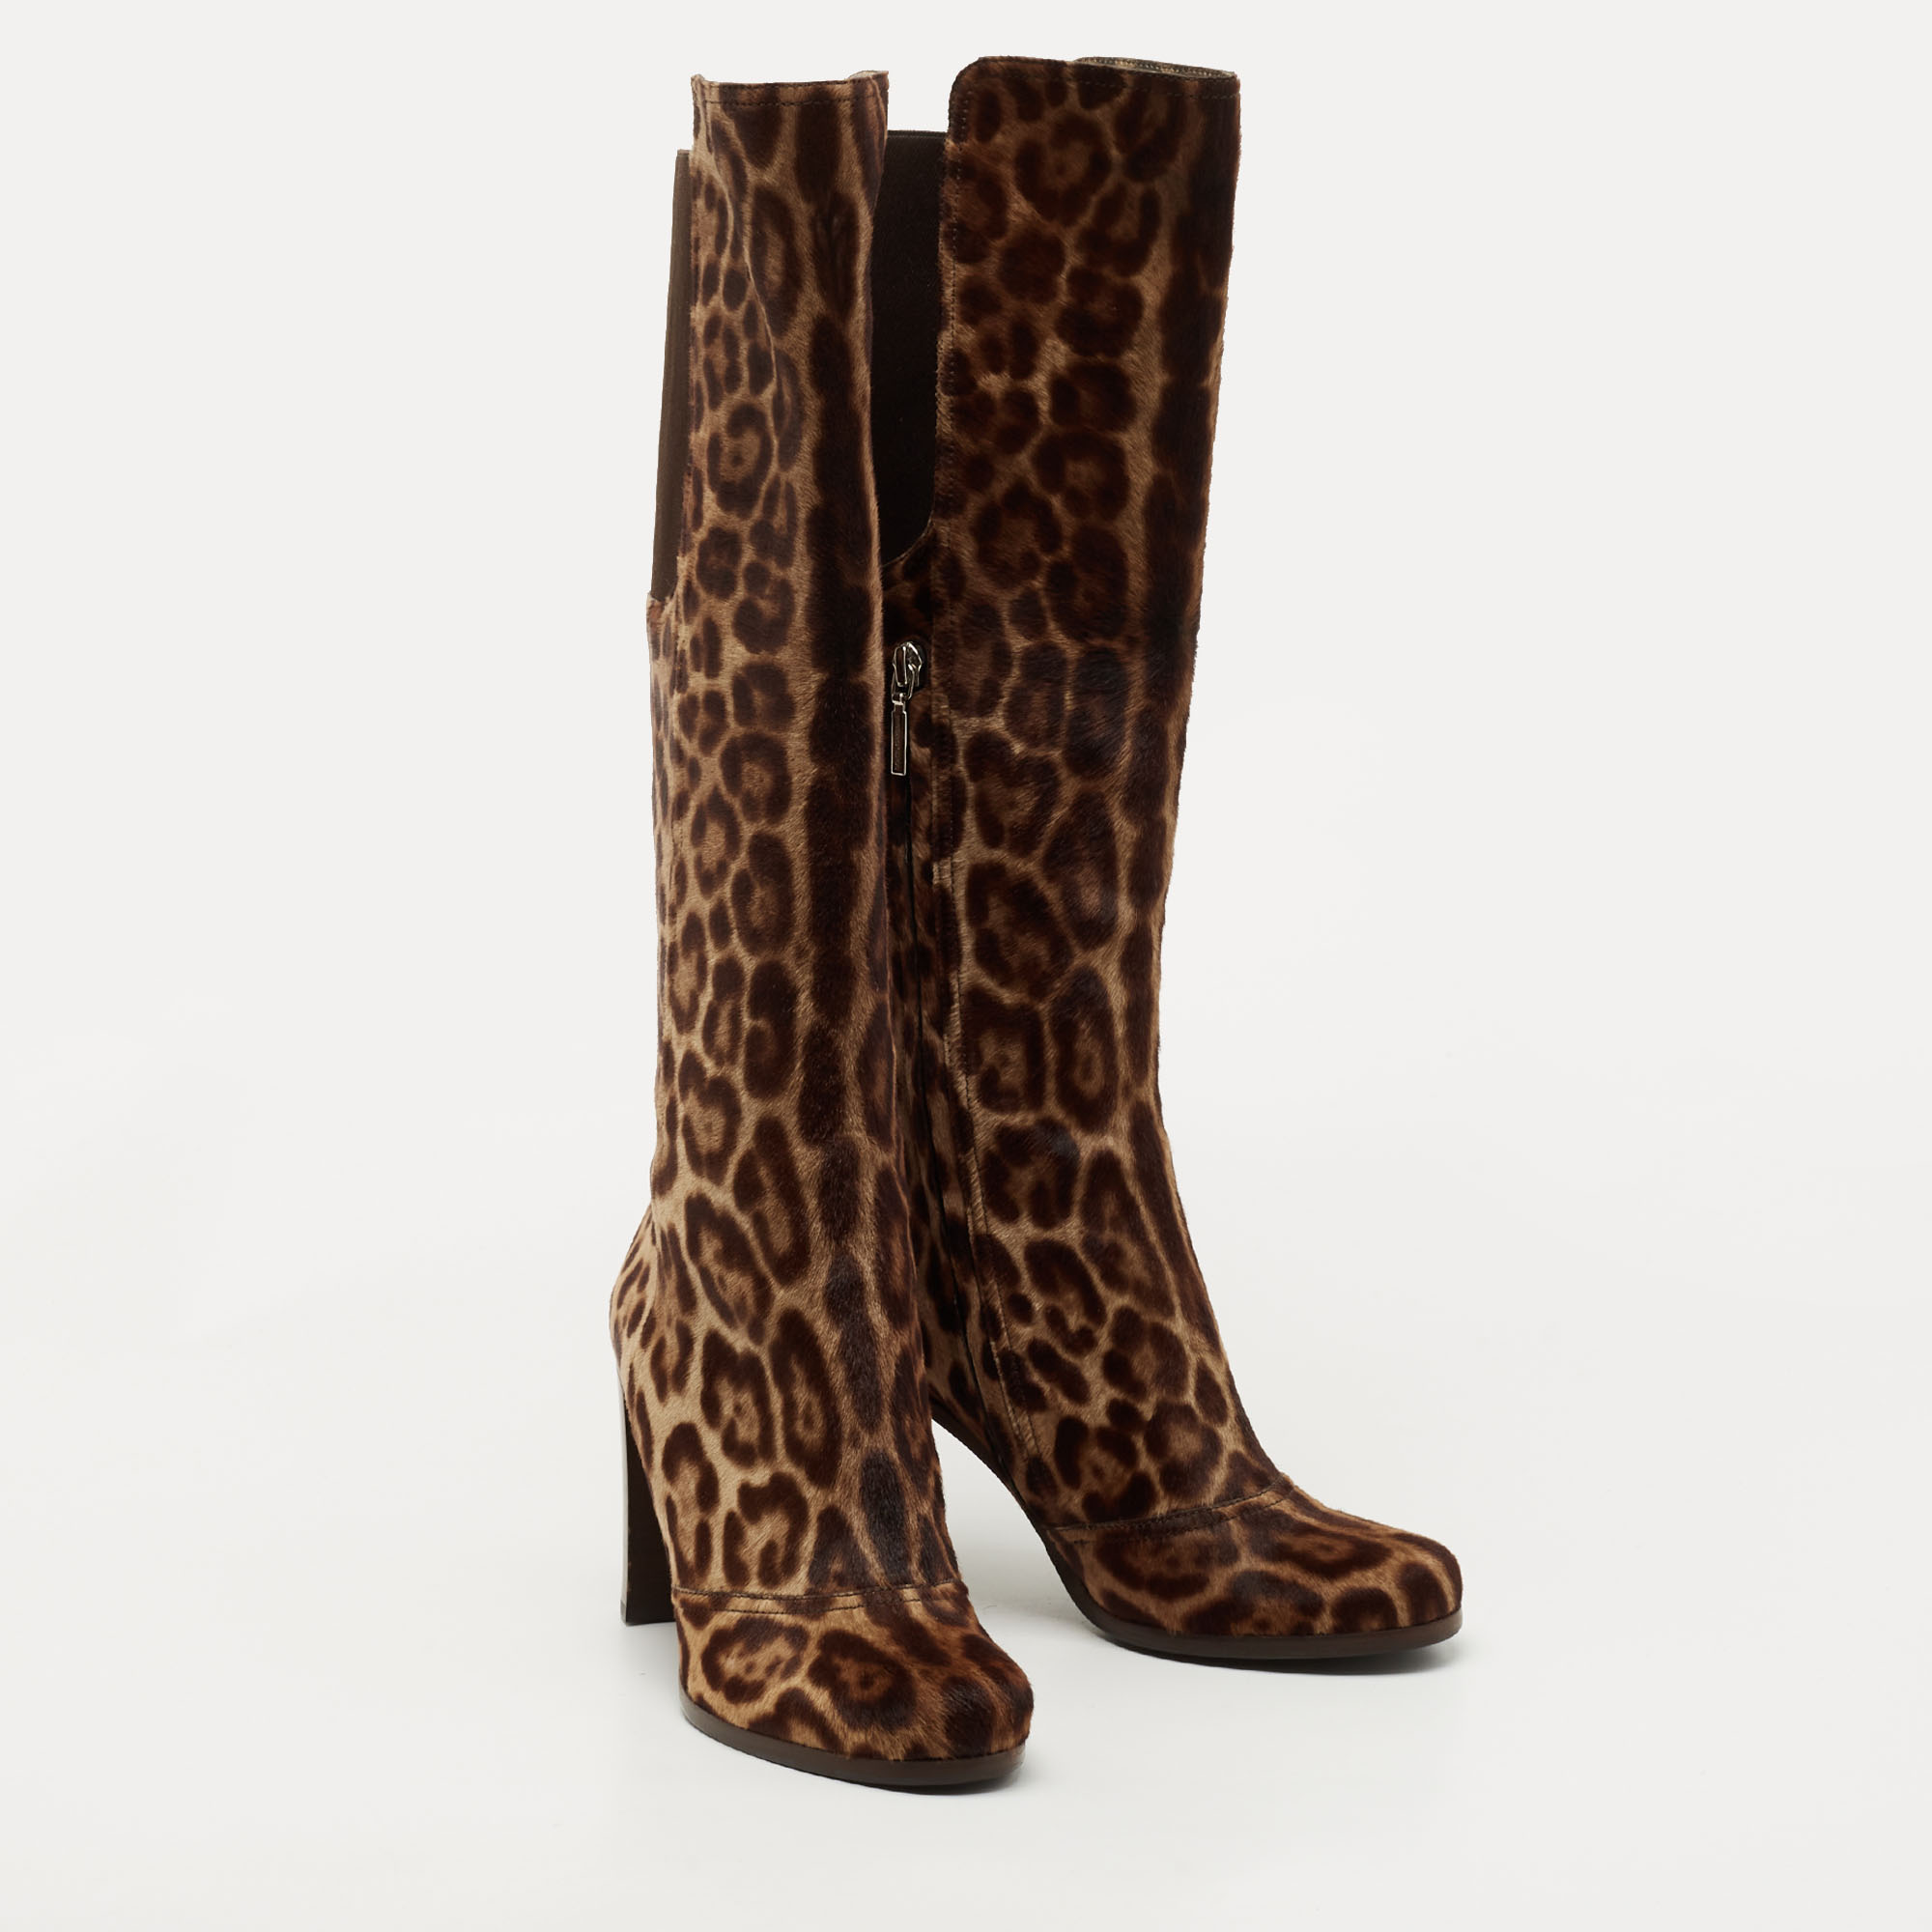 Dolce & Gabbana Brown Leopard Print Suede Knee Length Boots Size 40